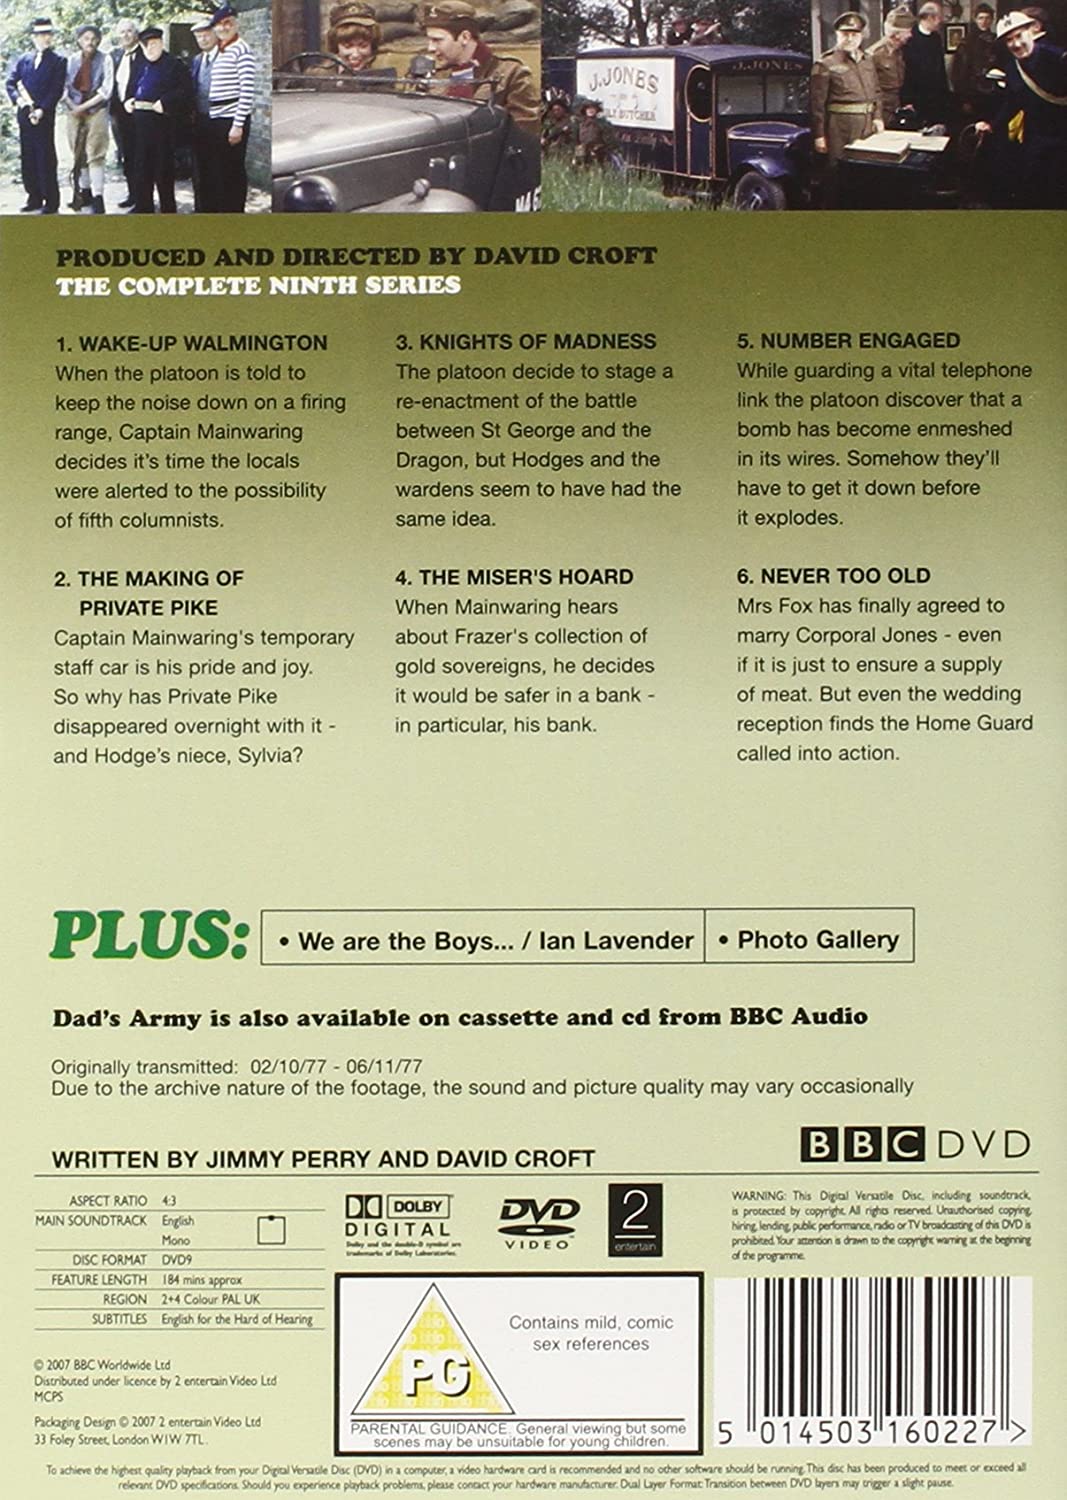 Dad's Army - The Complete Ninth Series [1977] [2007] [DVD]